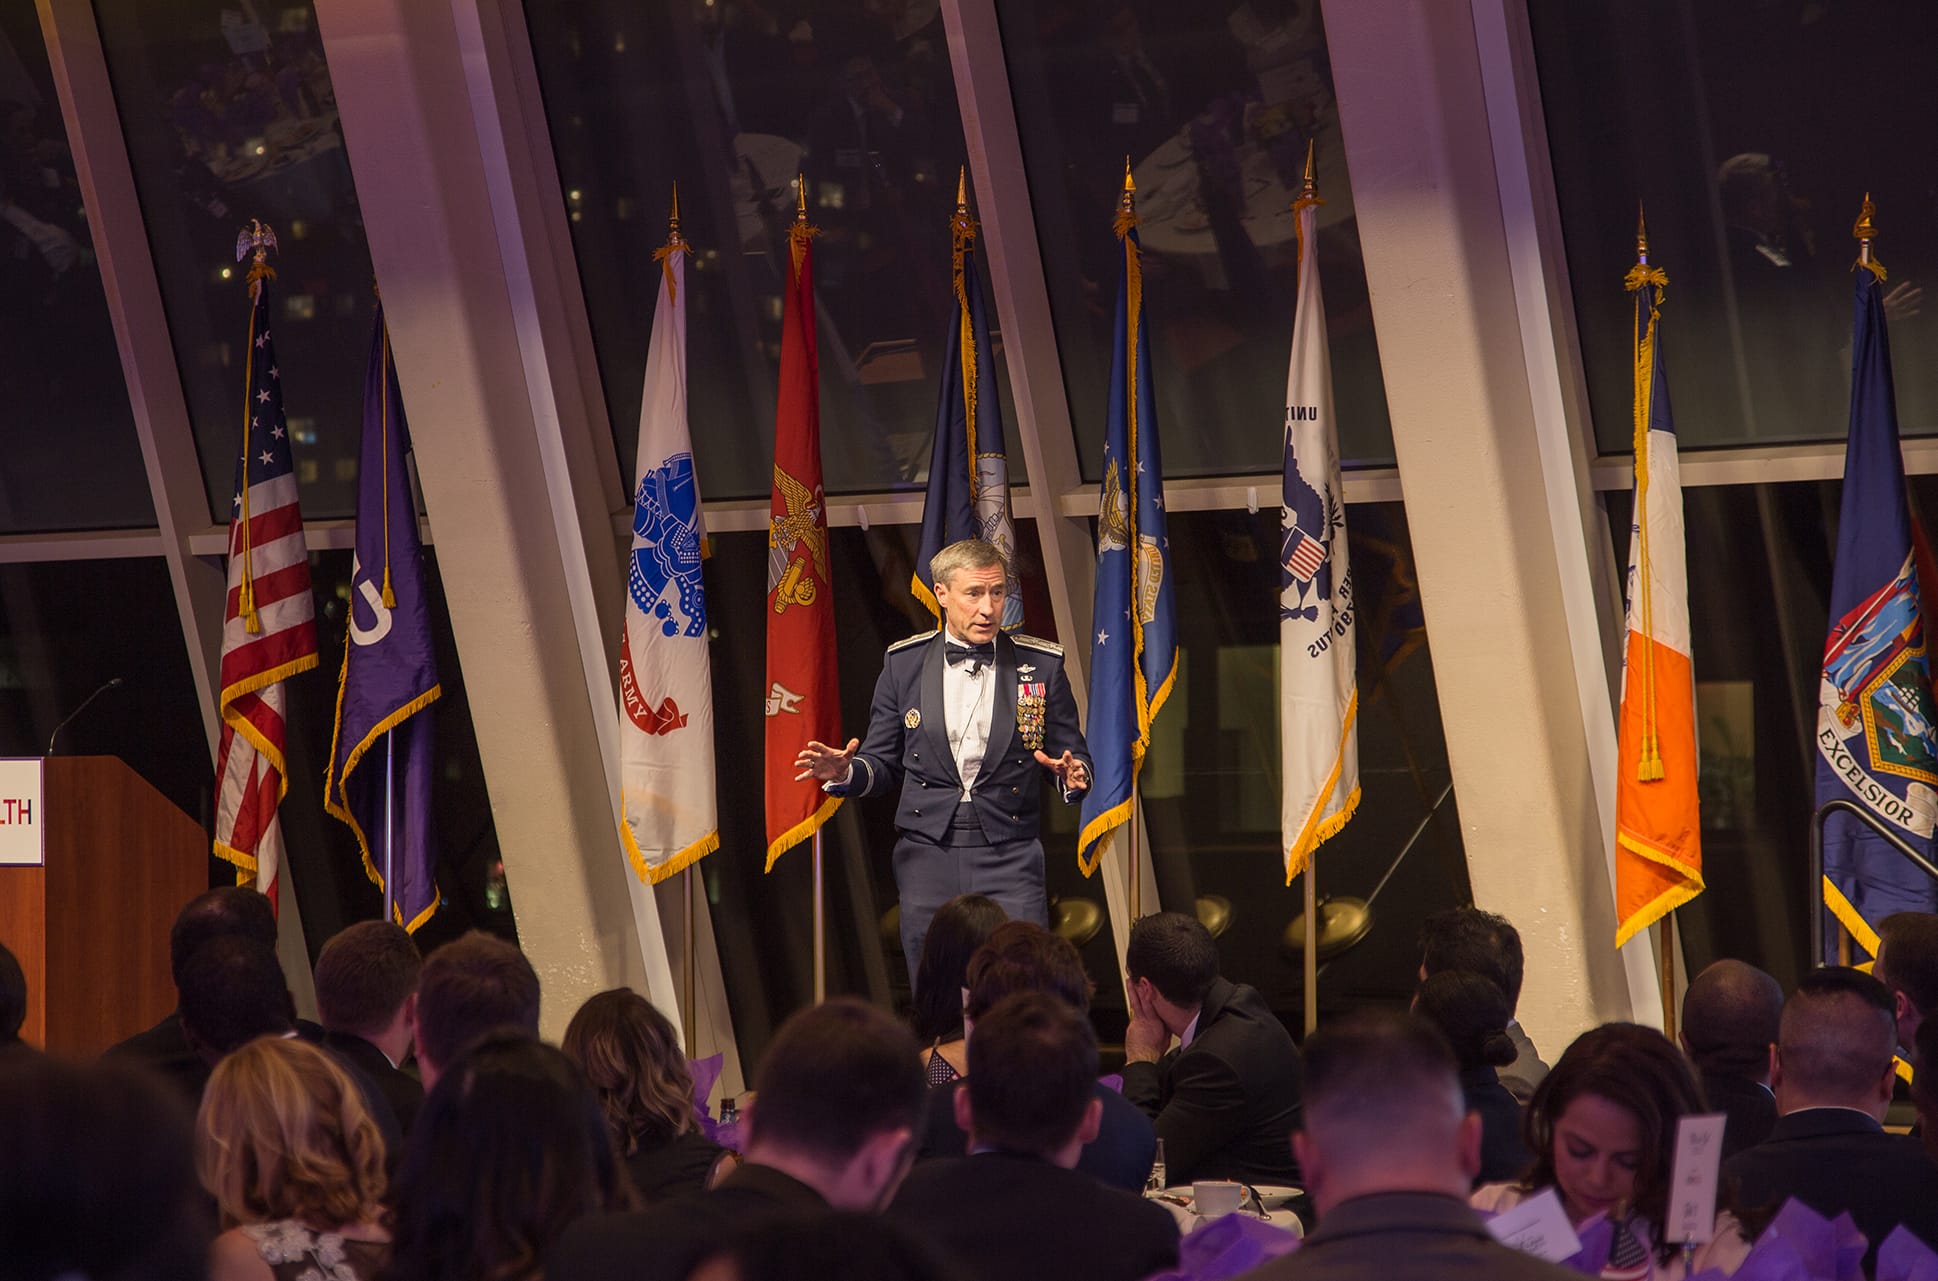 A uniformed officer speaking at the NYU Veterans Ball.